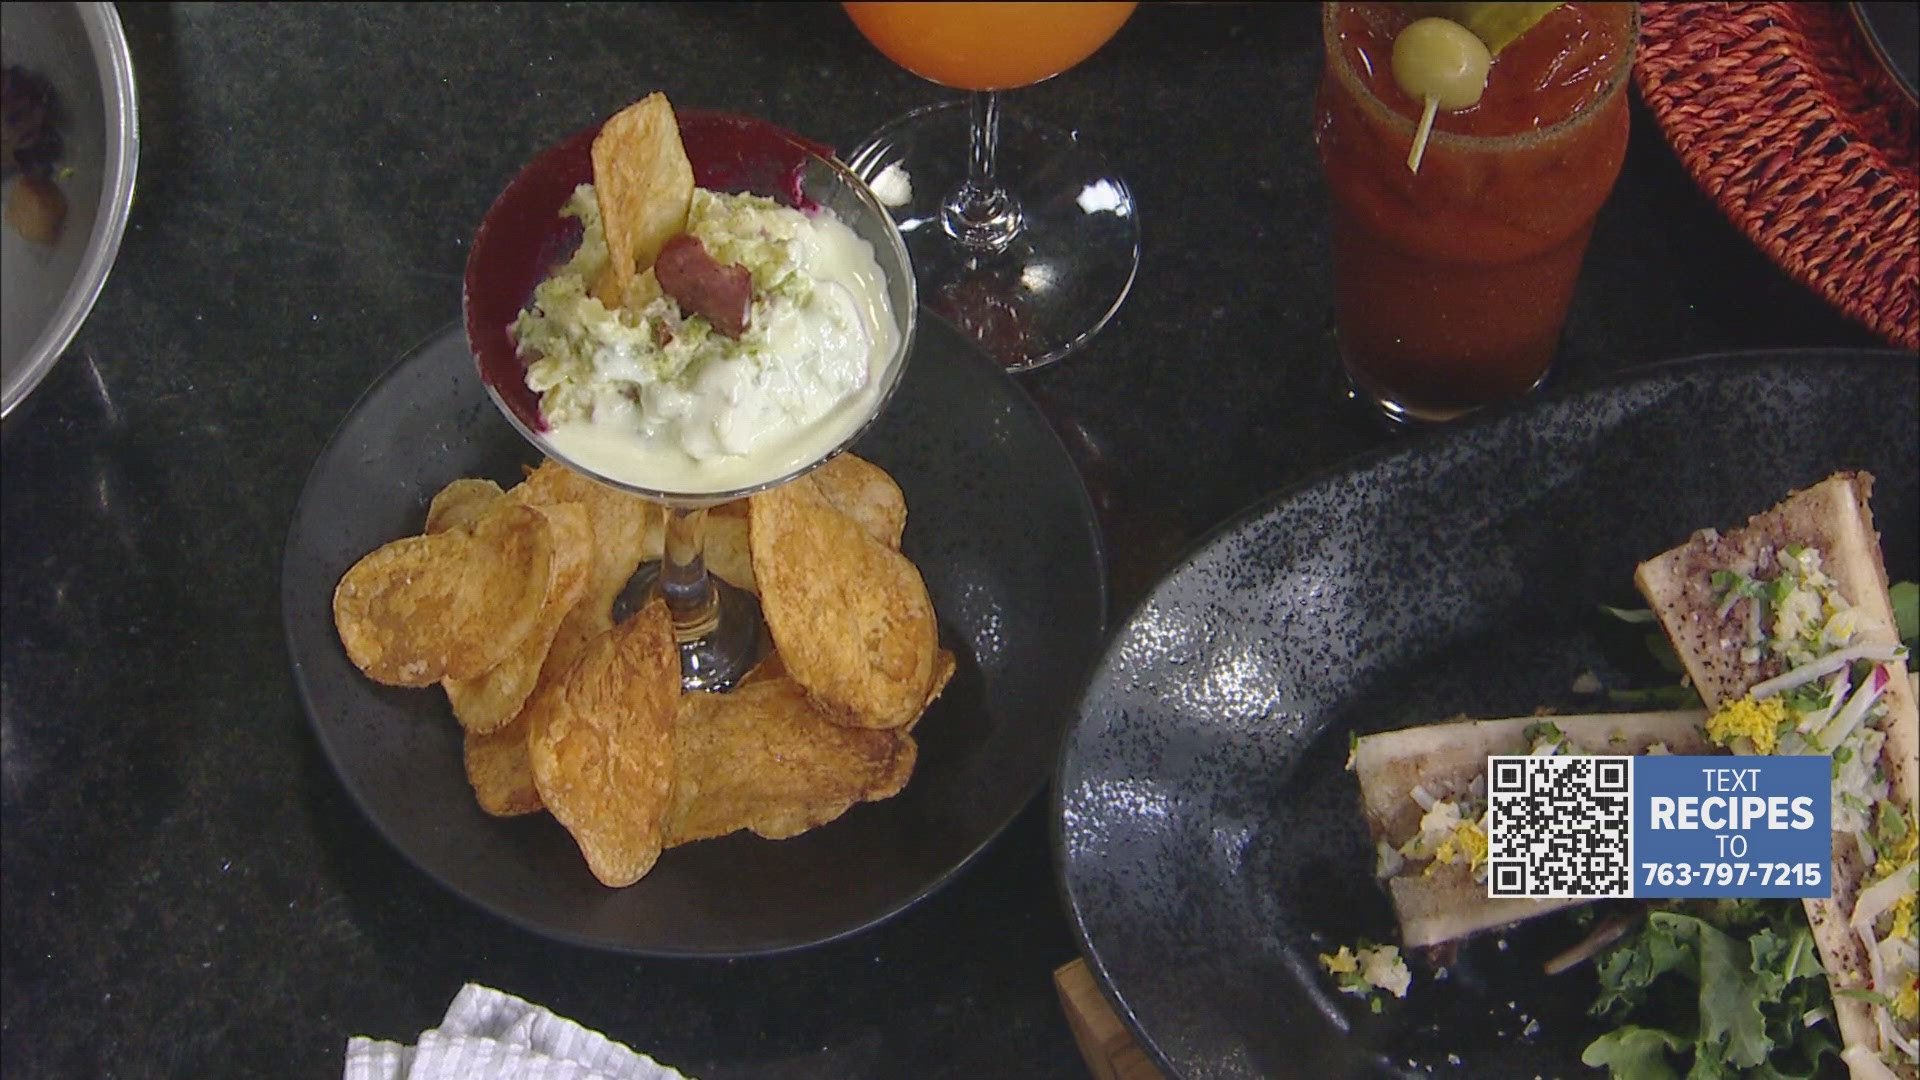 Chefs Jose Sanchez and James Nelson joined KARE 11 Saturday to discuss the new menu.